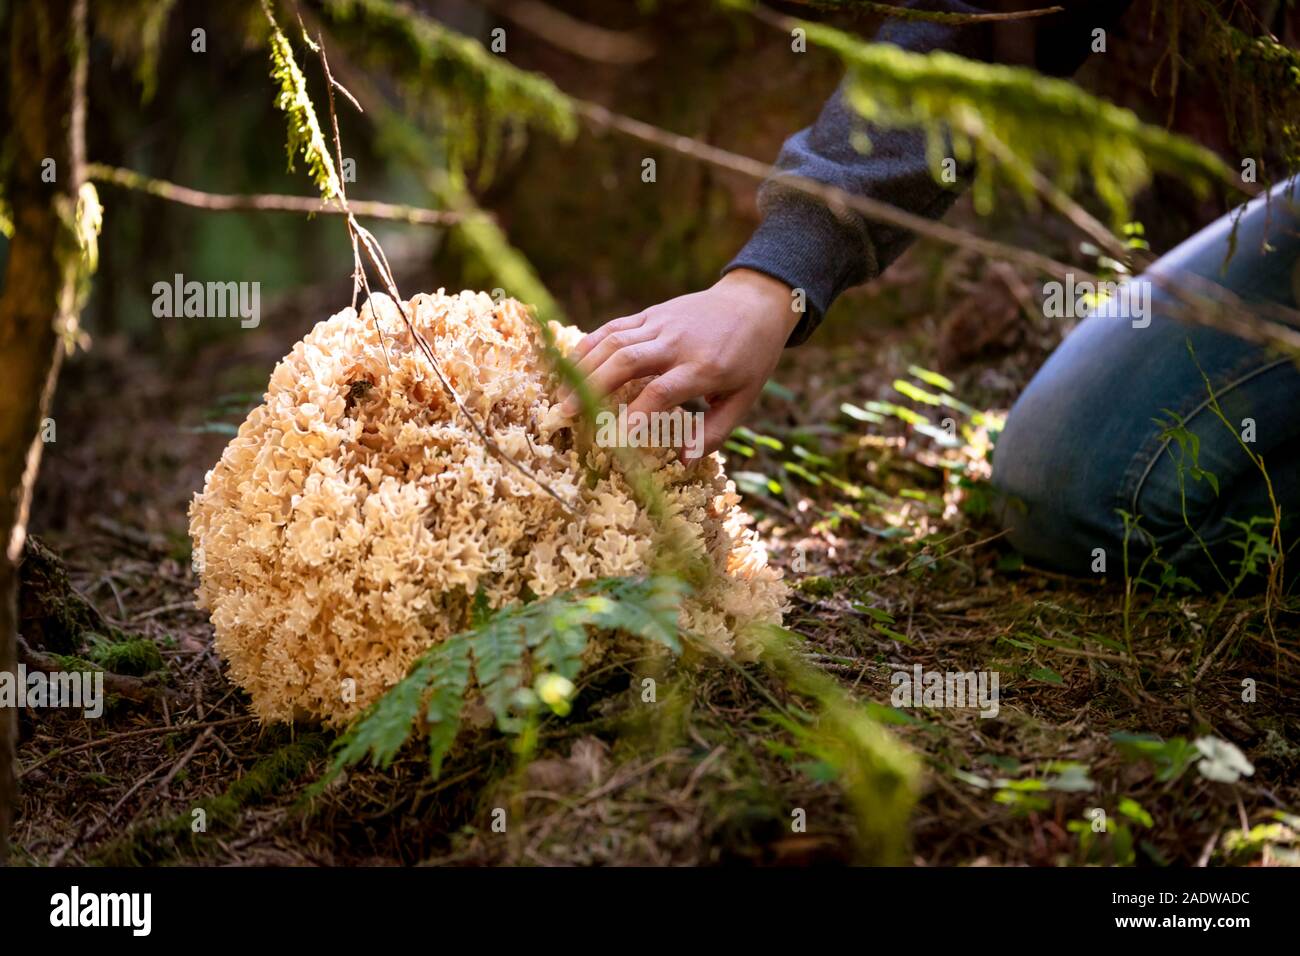 big Sparassis Crispa on the forest ground, woman is going mushrooming Stock Photo